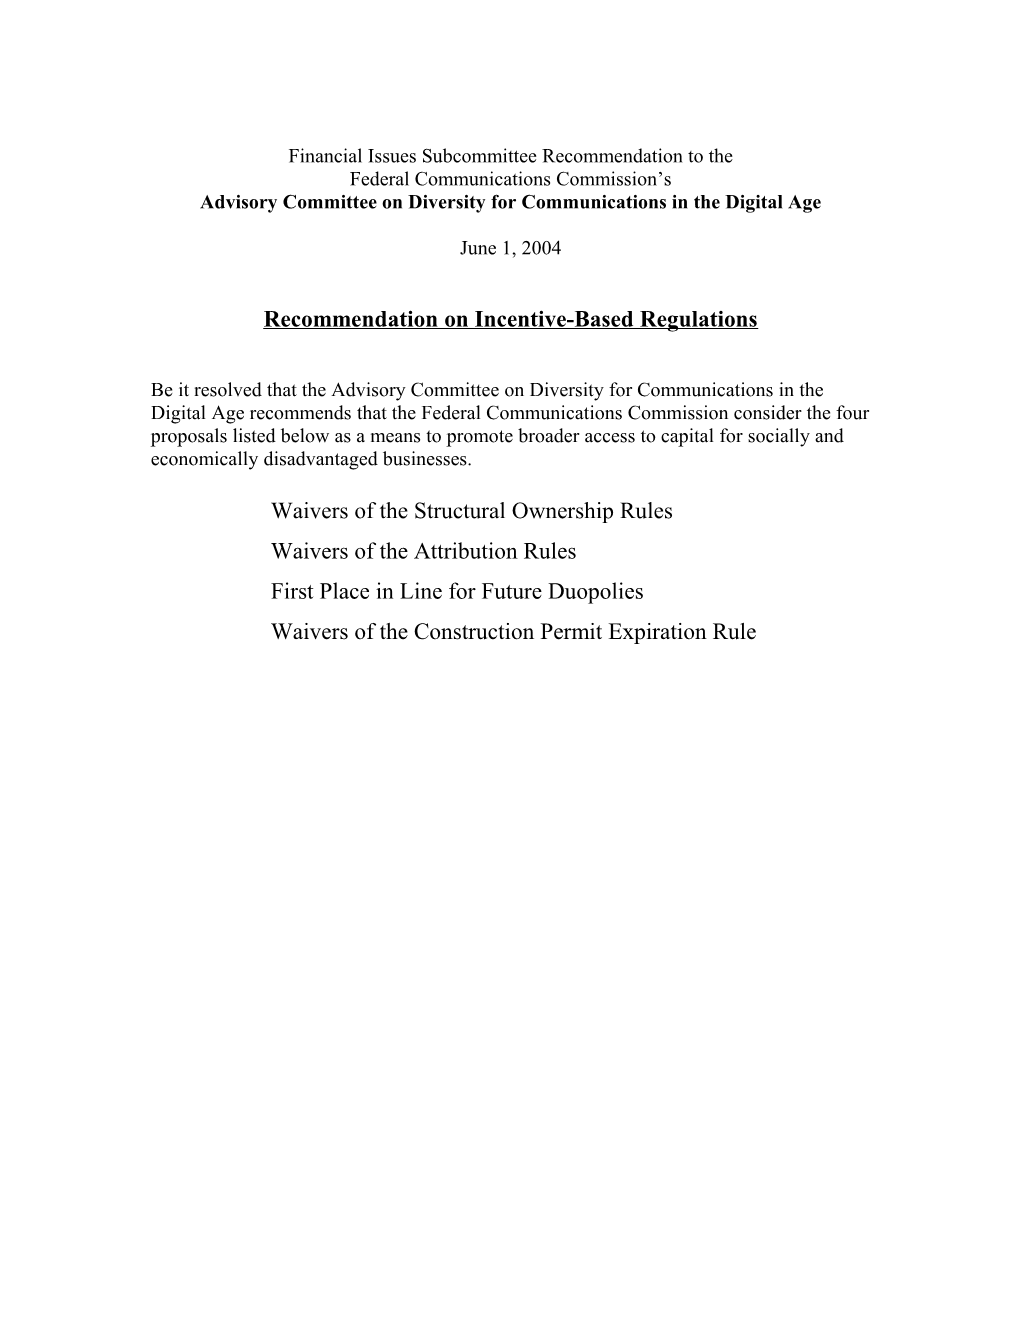 Financial Issues Subcommittee Recommendation to The